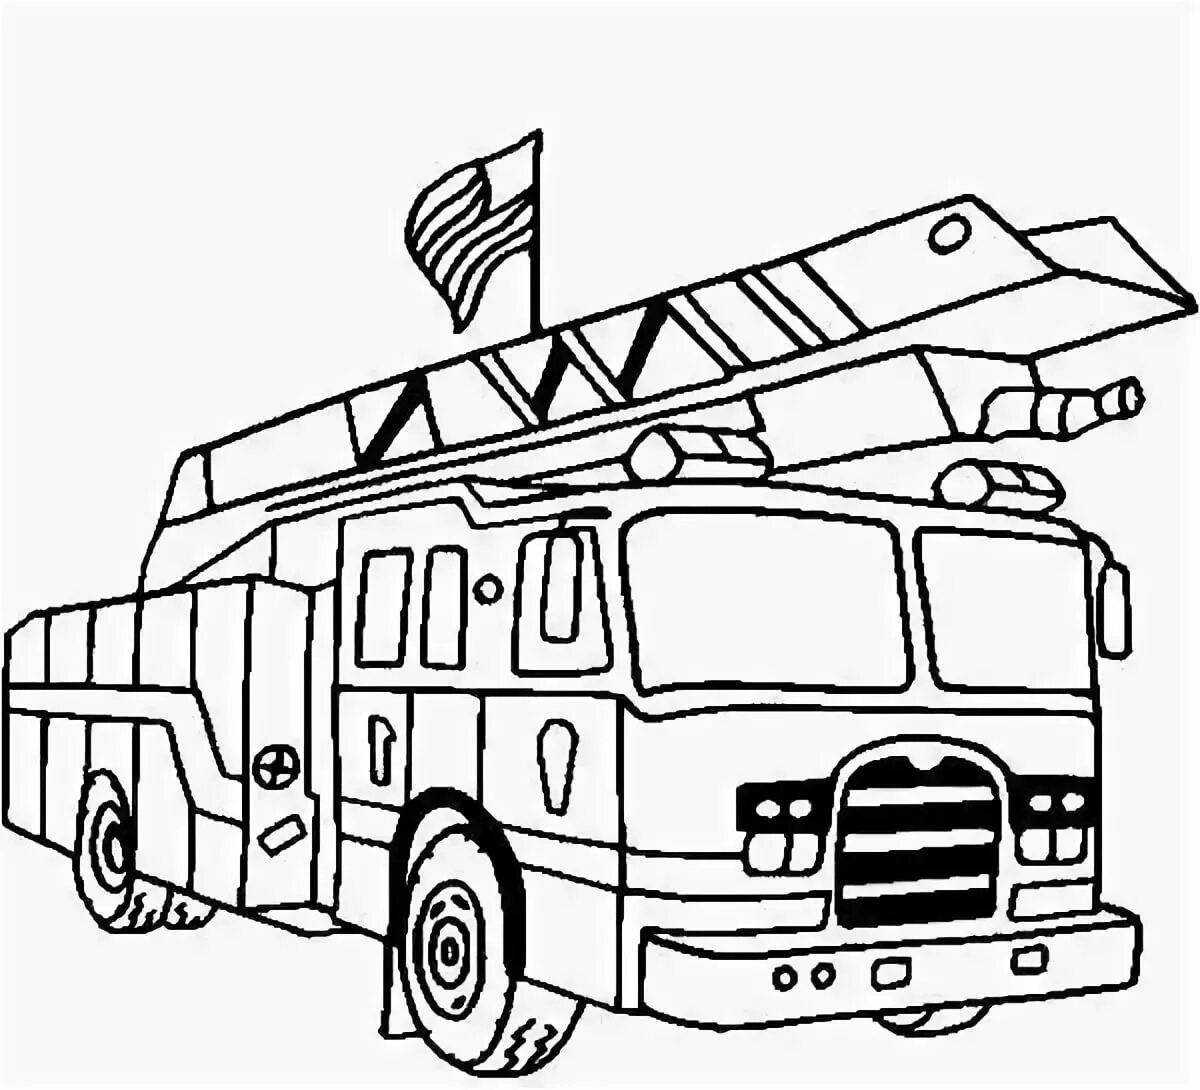 Fun boys fire truck coloring page